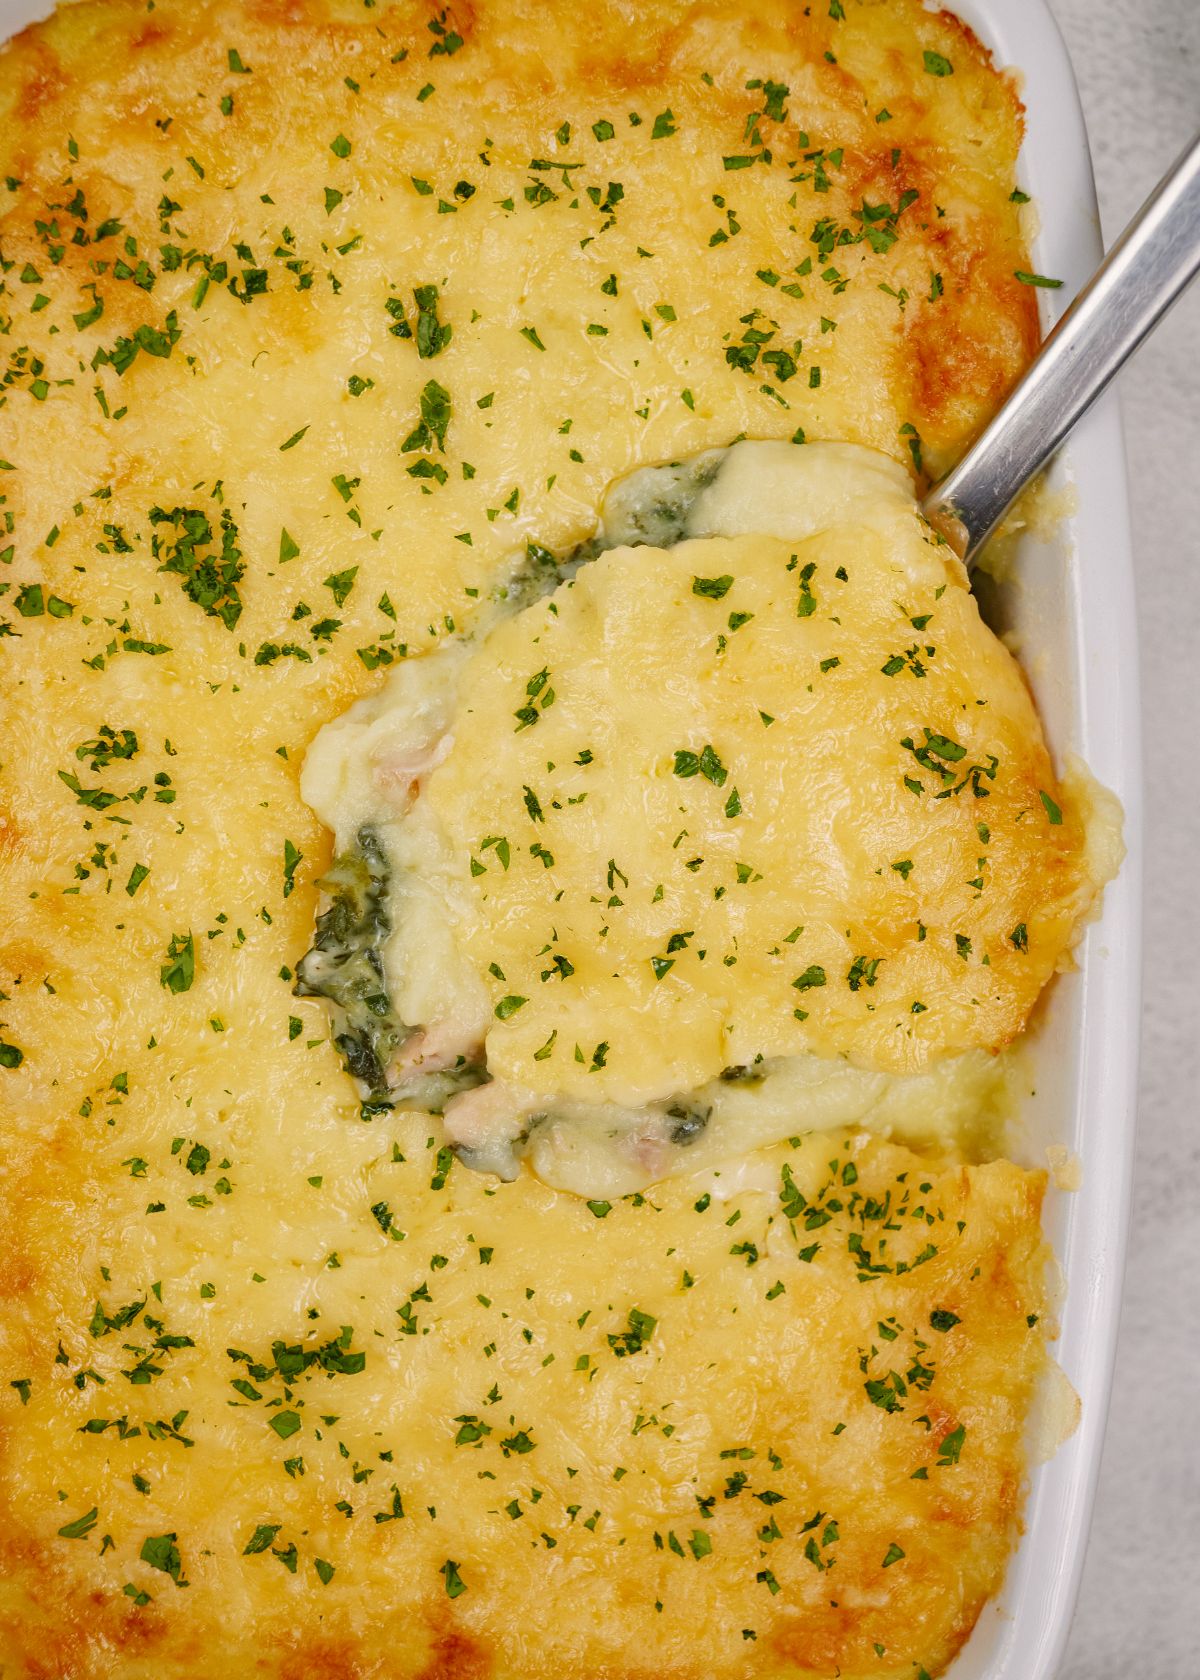 silver spoon in edge of salmon and spinach casserole